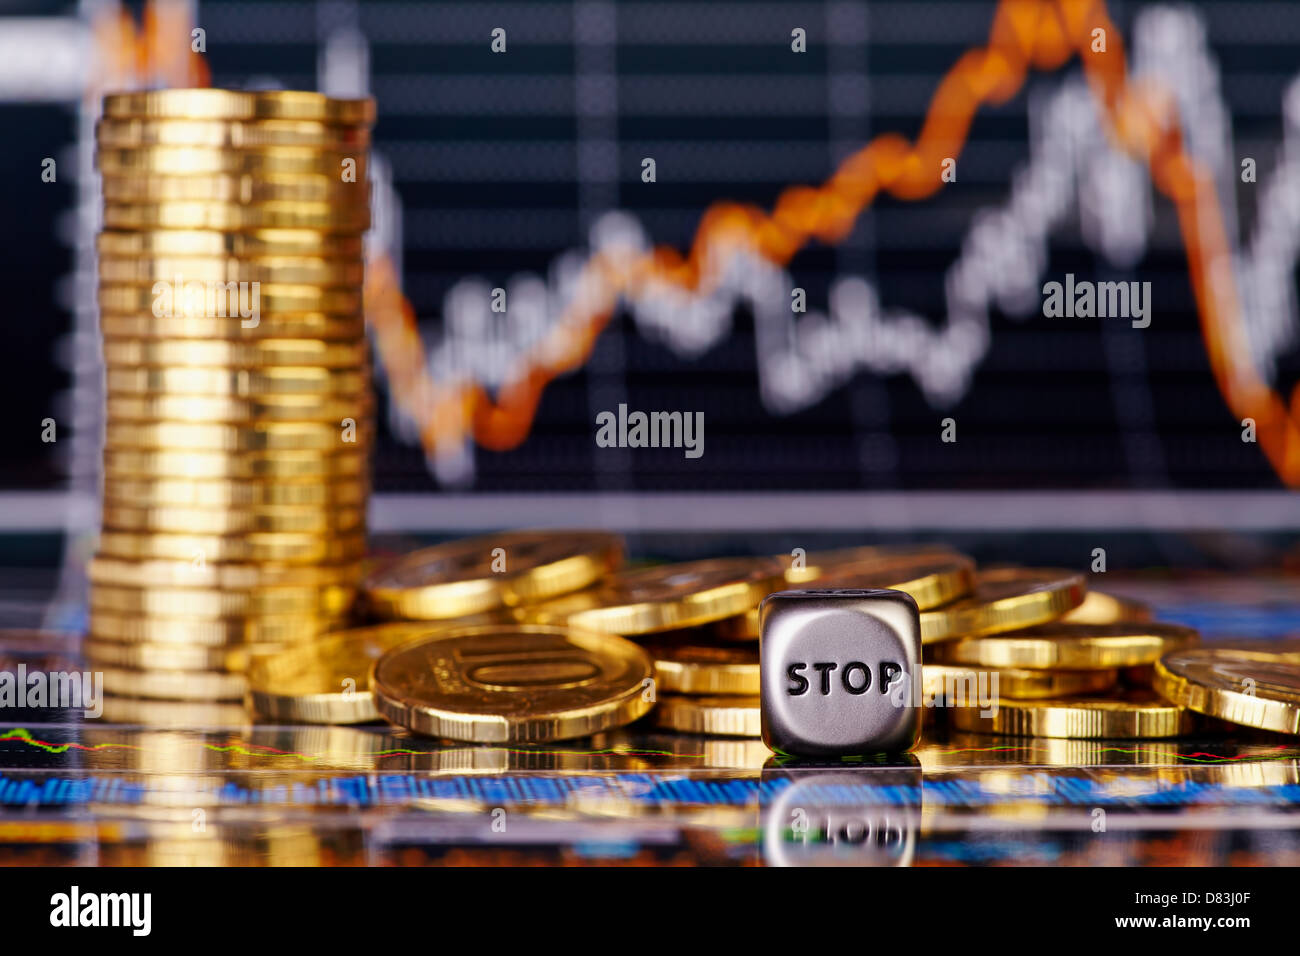 Dices cube with the word STOP golden coins. Financial stock charts as background. Selective focus Stock Photo